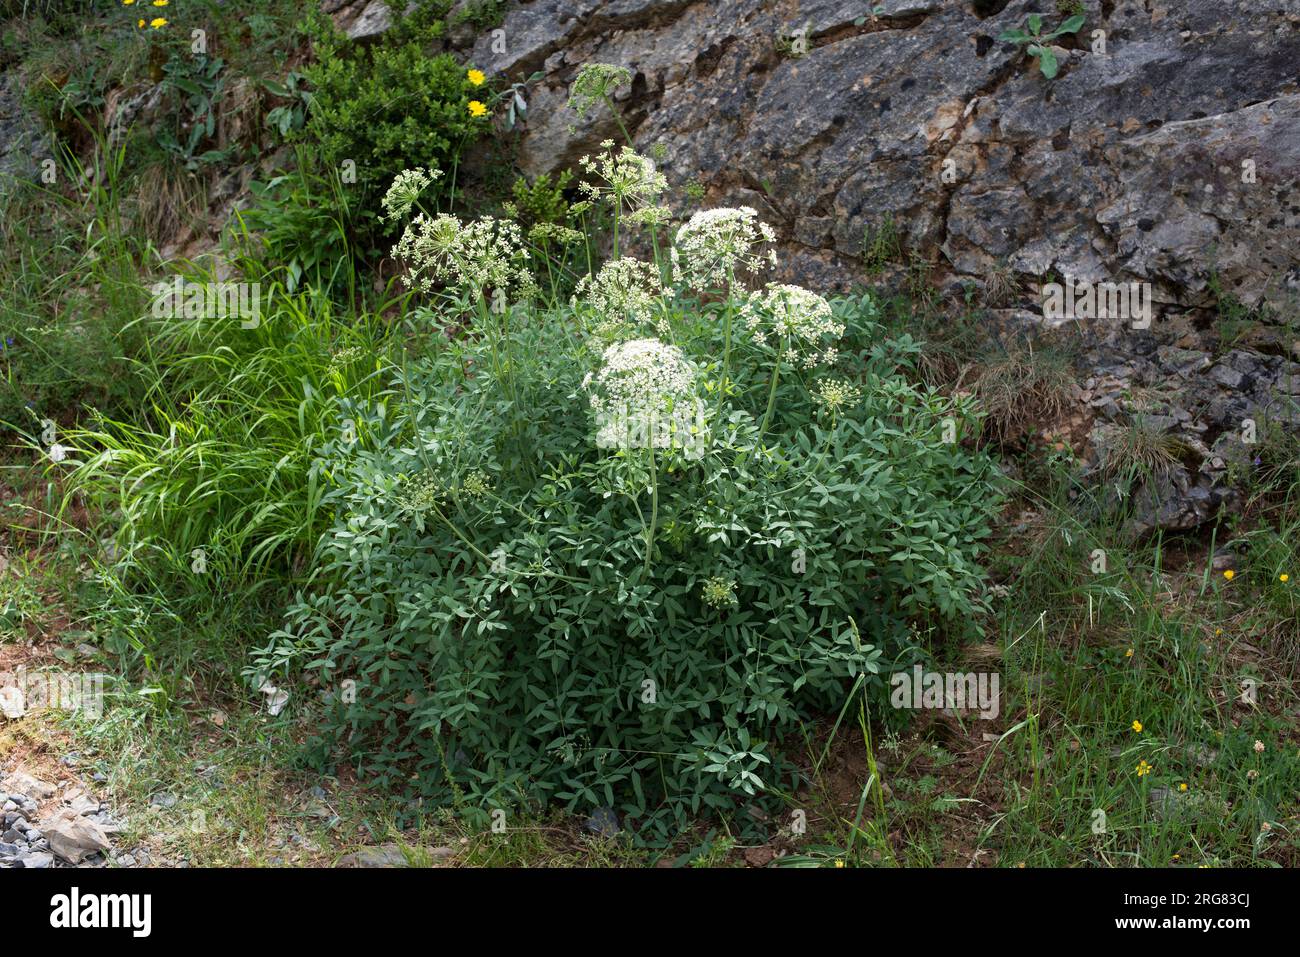 Broad-lived sermountain (Laserpitium latifolium) is a perennial herb with biternate leaves. Flowers are white and clustored in umbrels. It grows in eu Stock Photo